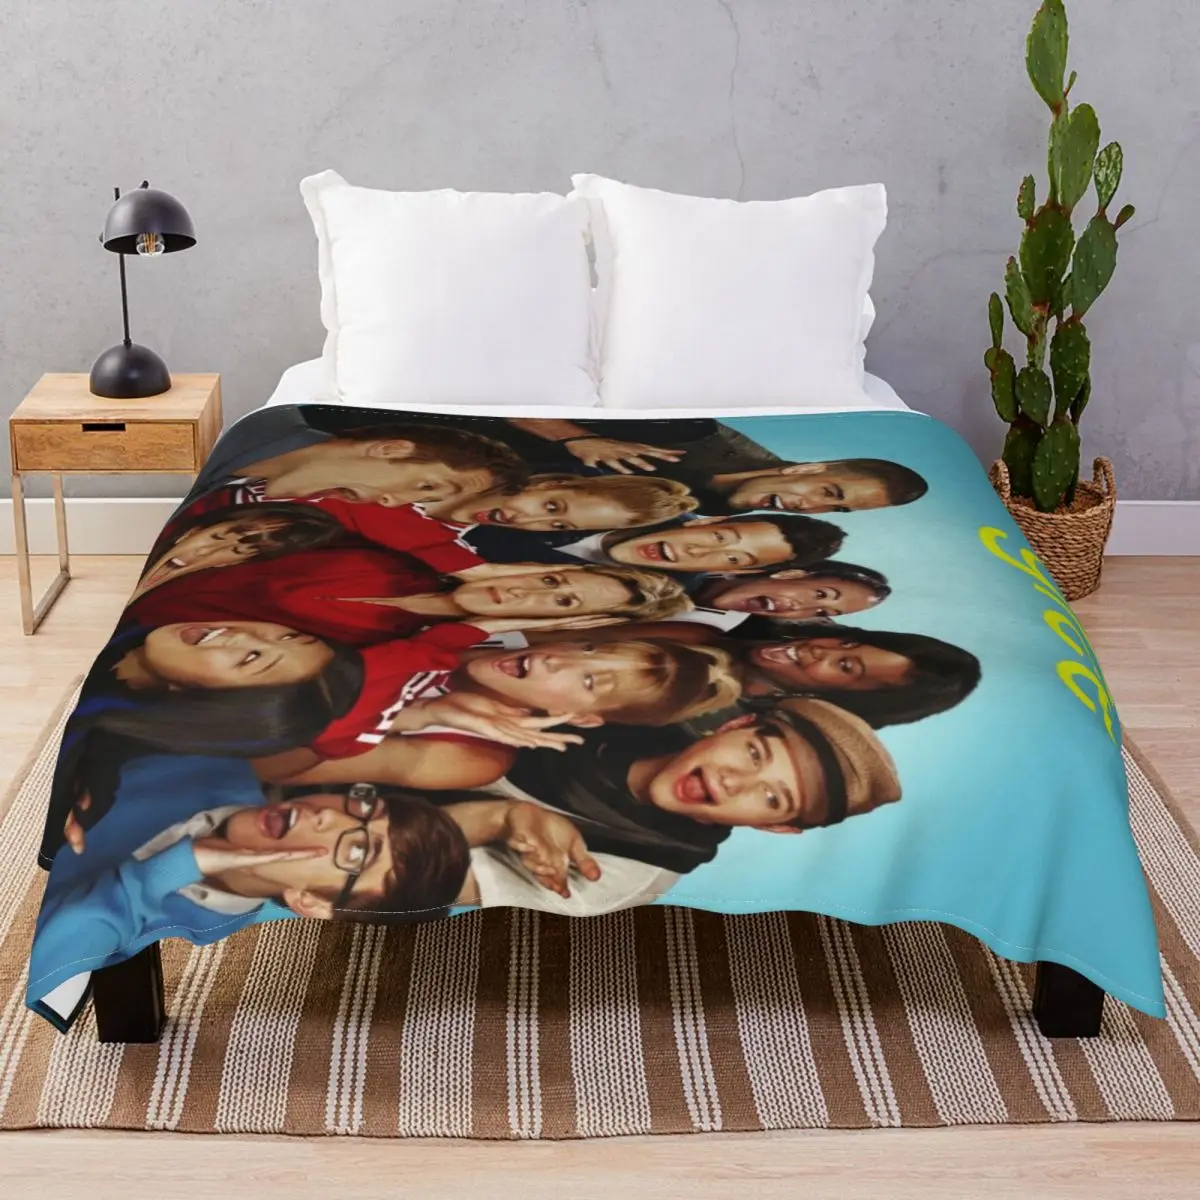 Glee Blankets Flannel Plush Decoration Lightweight Thin Throw Blanket for Bedding Home Couch Travel Office